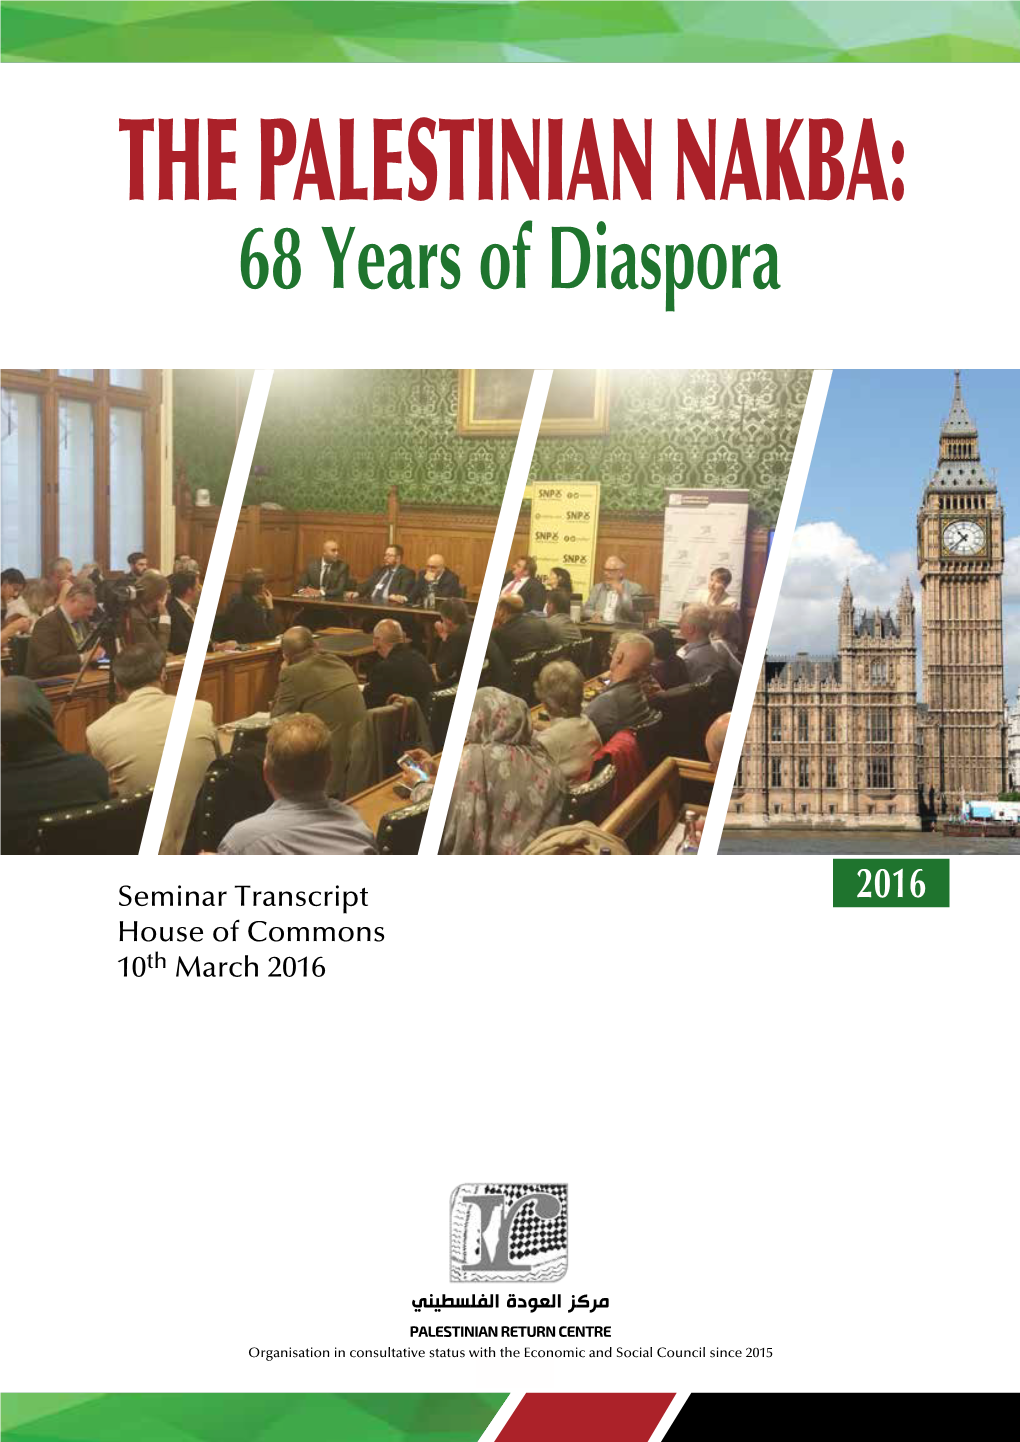 Seminar Transcript House of Commons 10Th March 2016